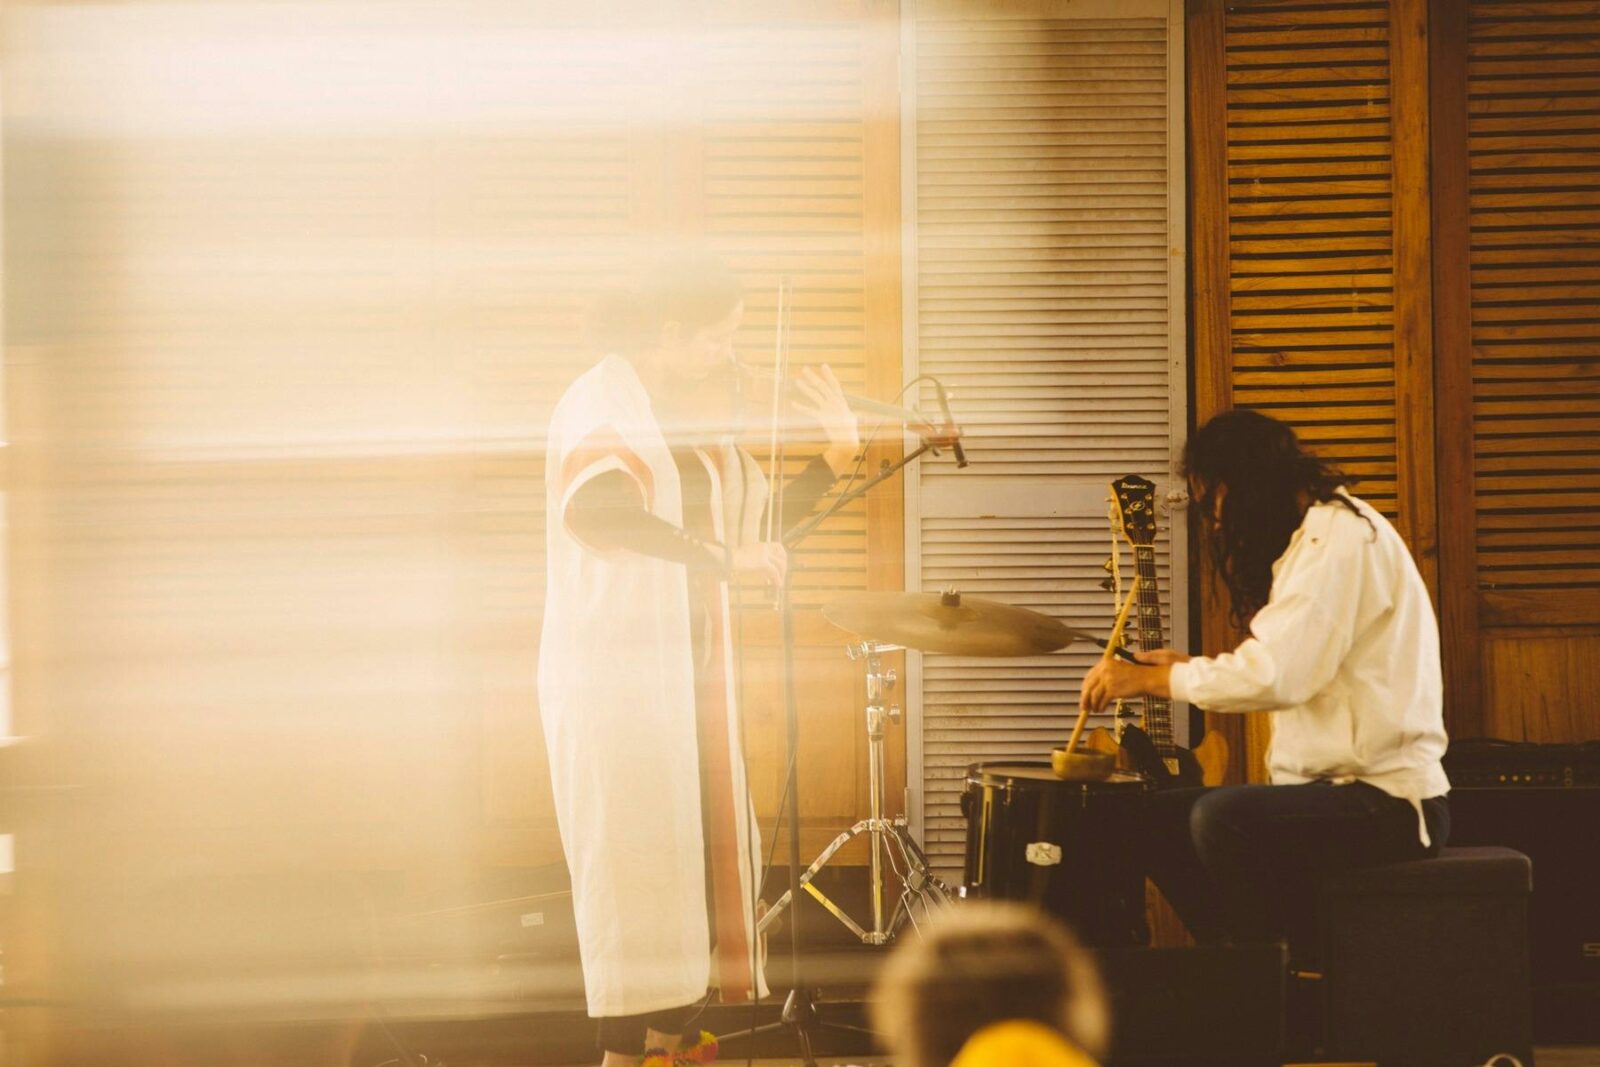 An abstract photos of two musicians with a golden hue